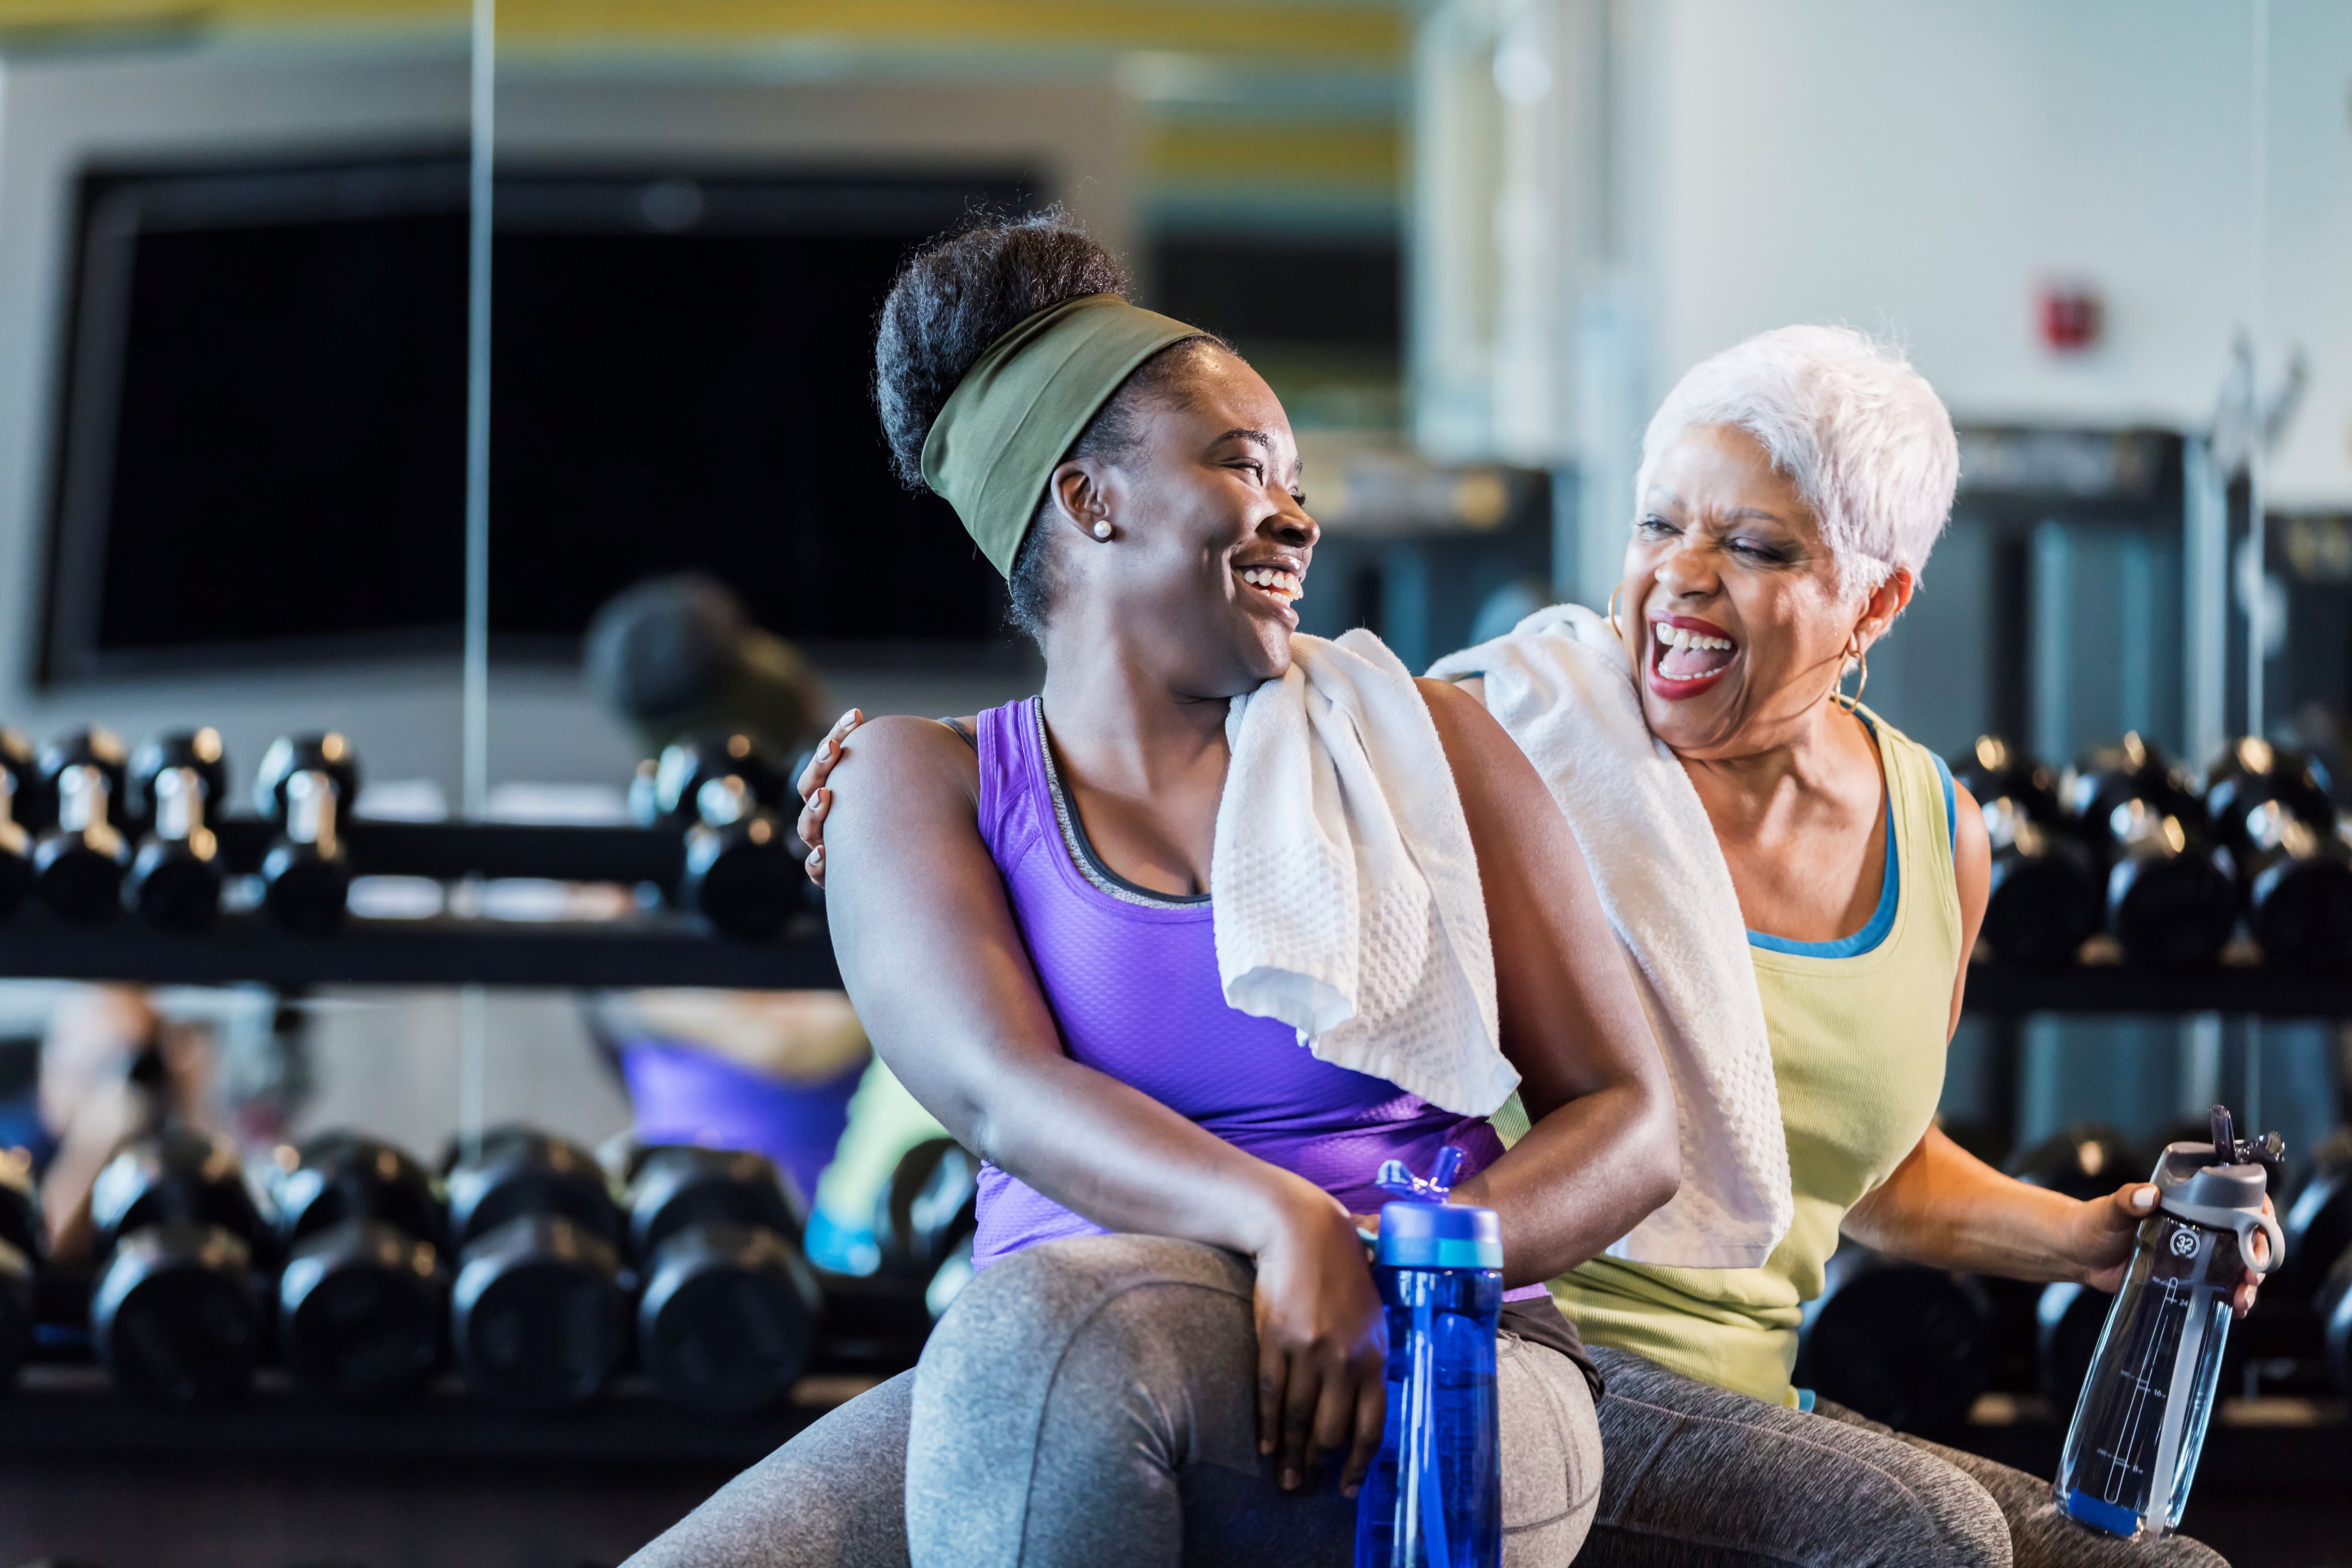 Two women share a laugh while working out together near free weights at the gym.